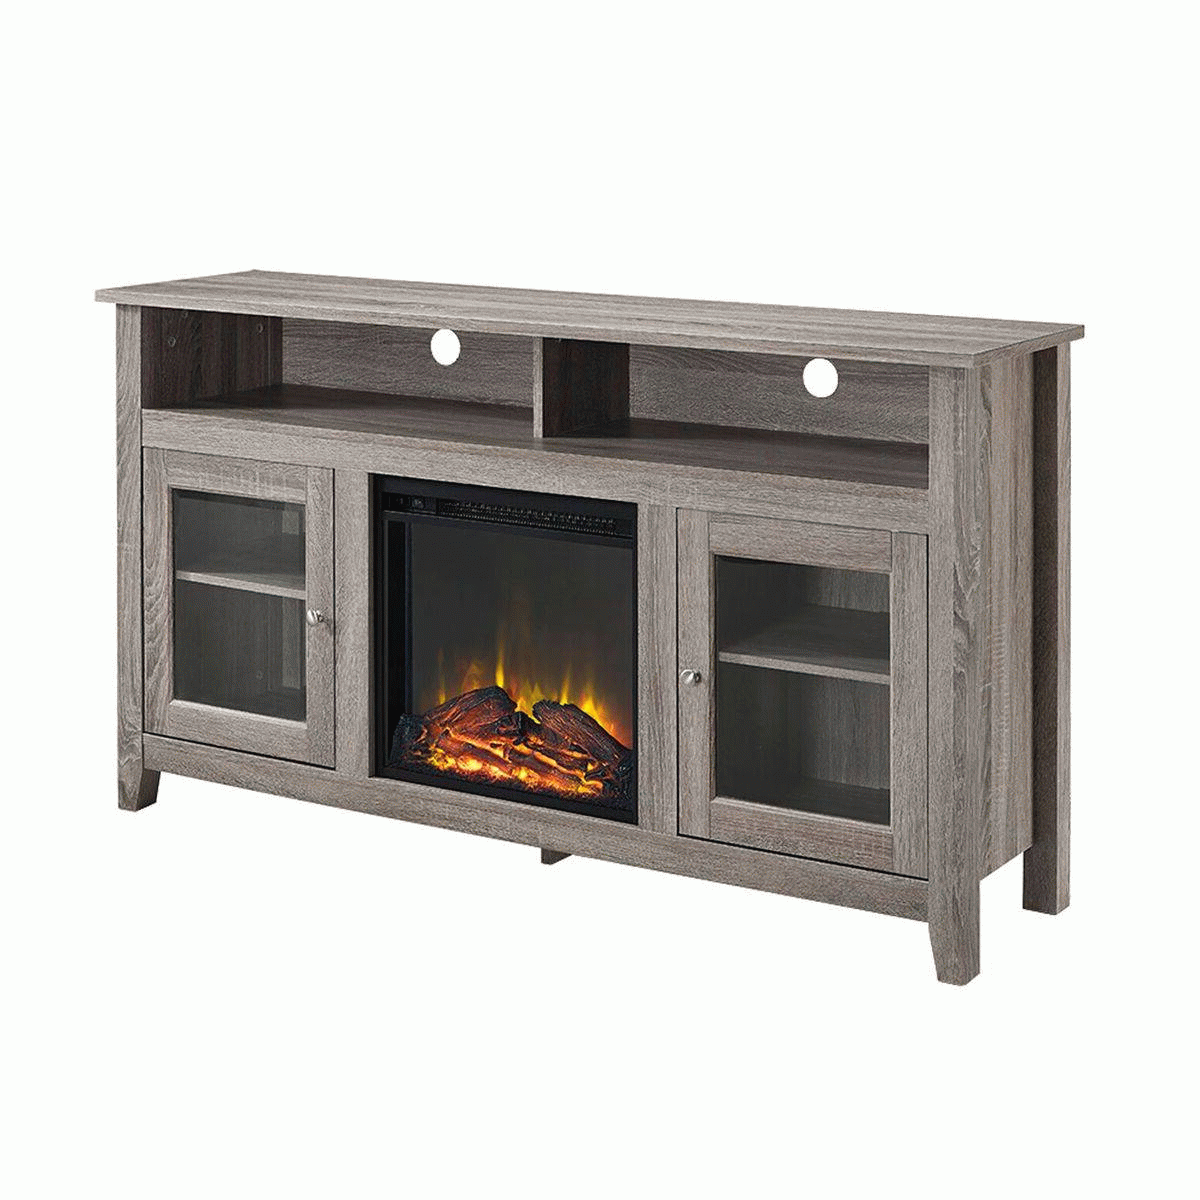 58" Wood Highboy Fireplace Tv Stand – Driftwood – Walker Edison W58fp18hbag Within Wood Highboy Fireplace Tv Stands (Gallery 4 of 20)